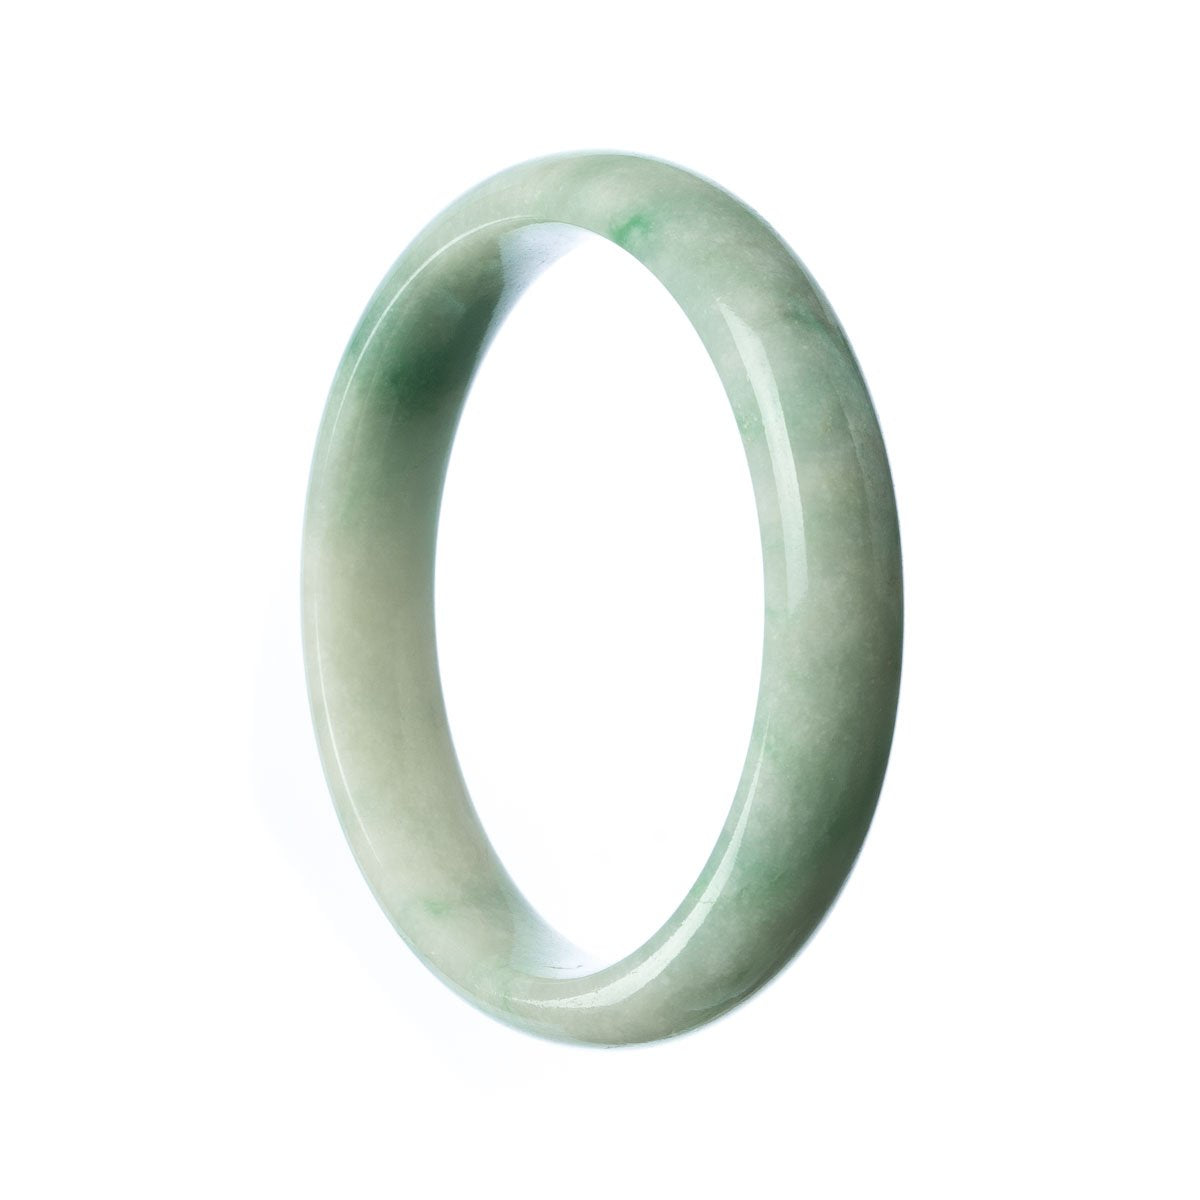 A pale green jade bangle bracelet with a half moon design, made from genuine grade A jade.